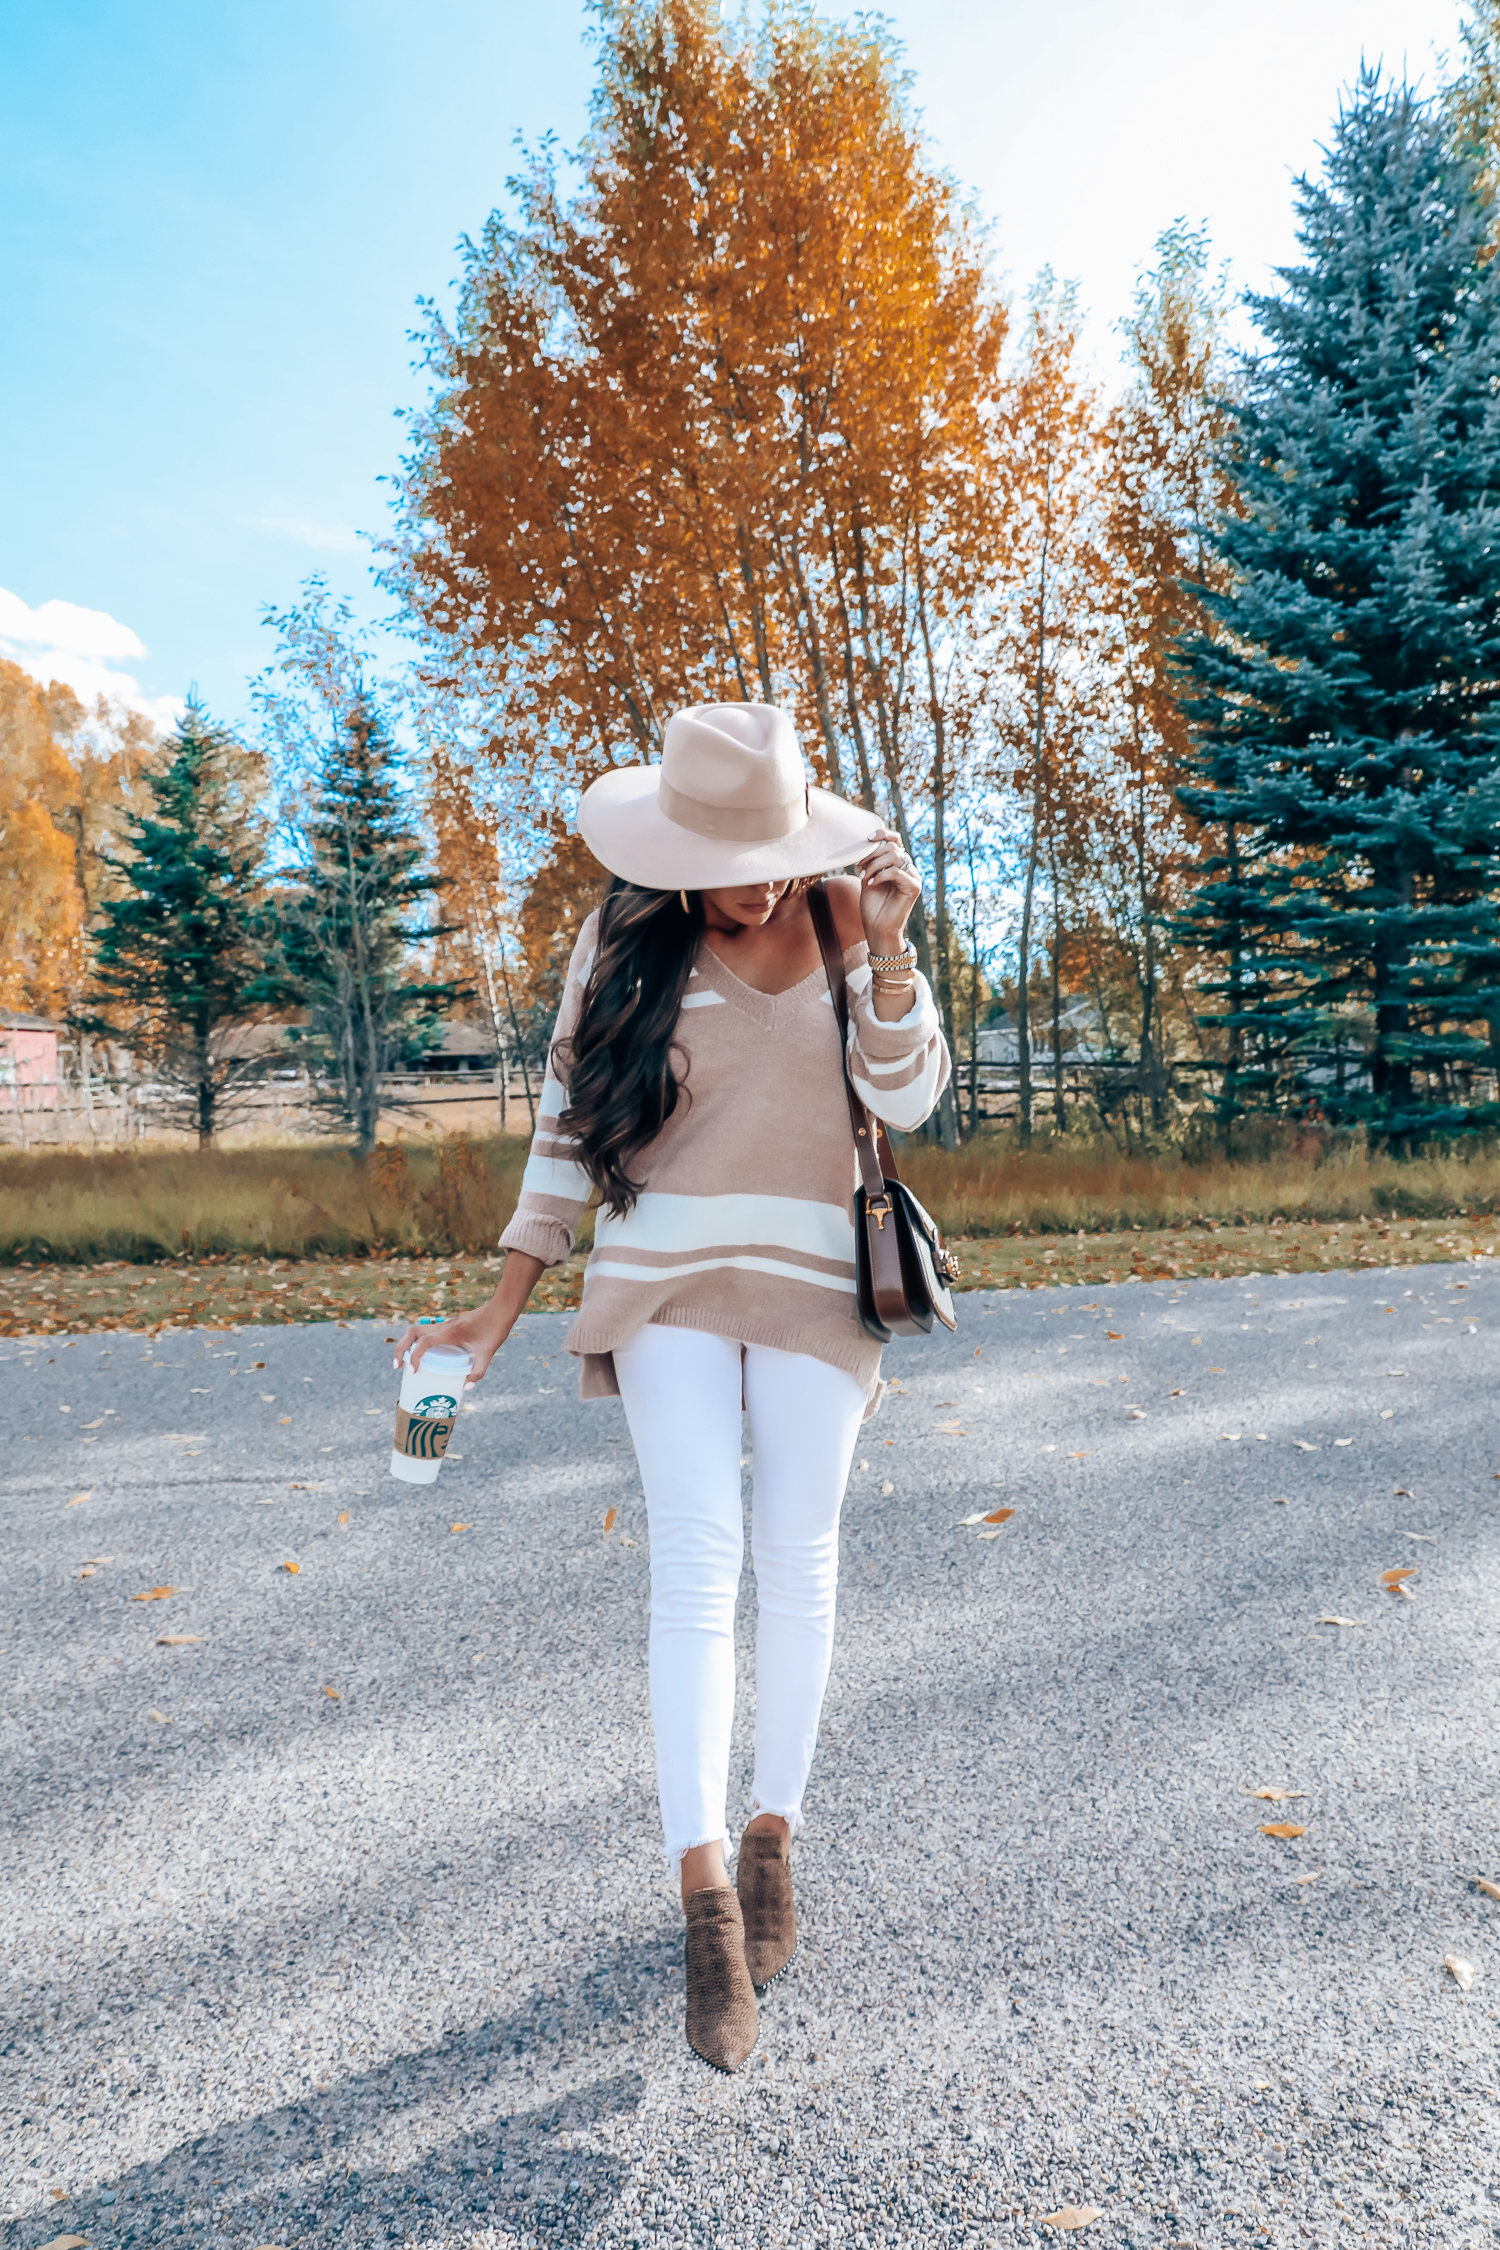 The First Fall Outfit Post + Rag & Bone Jeans